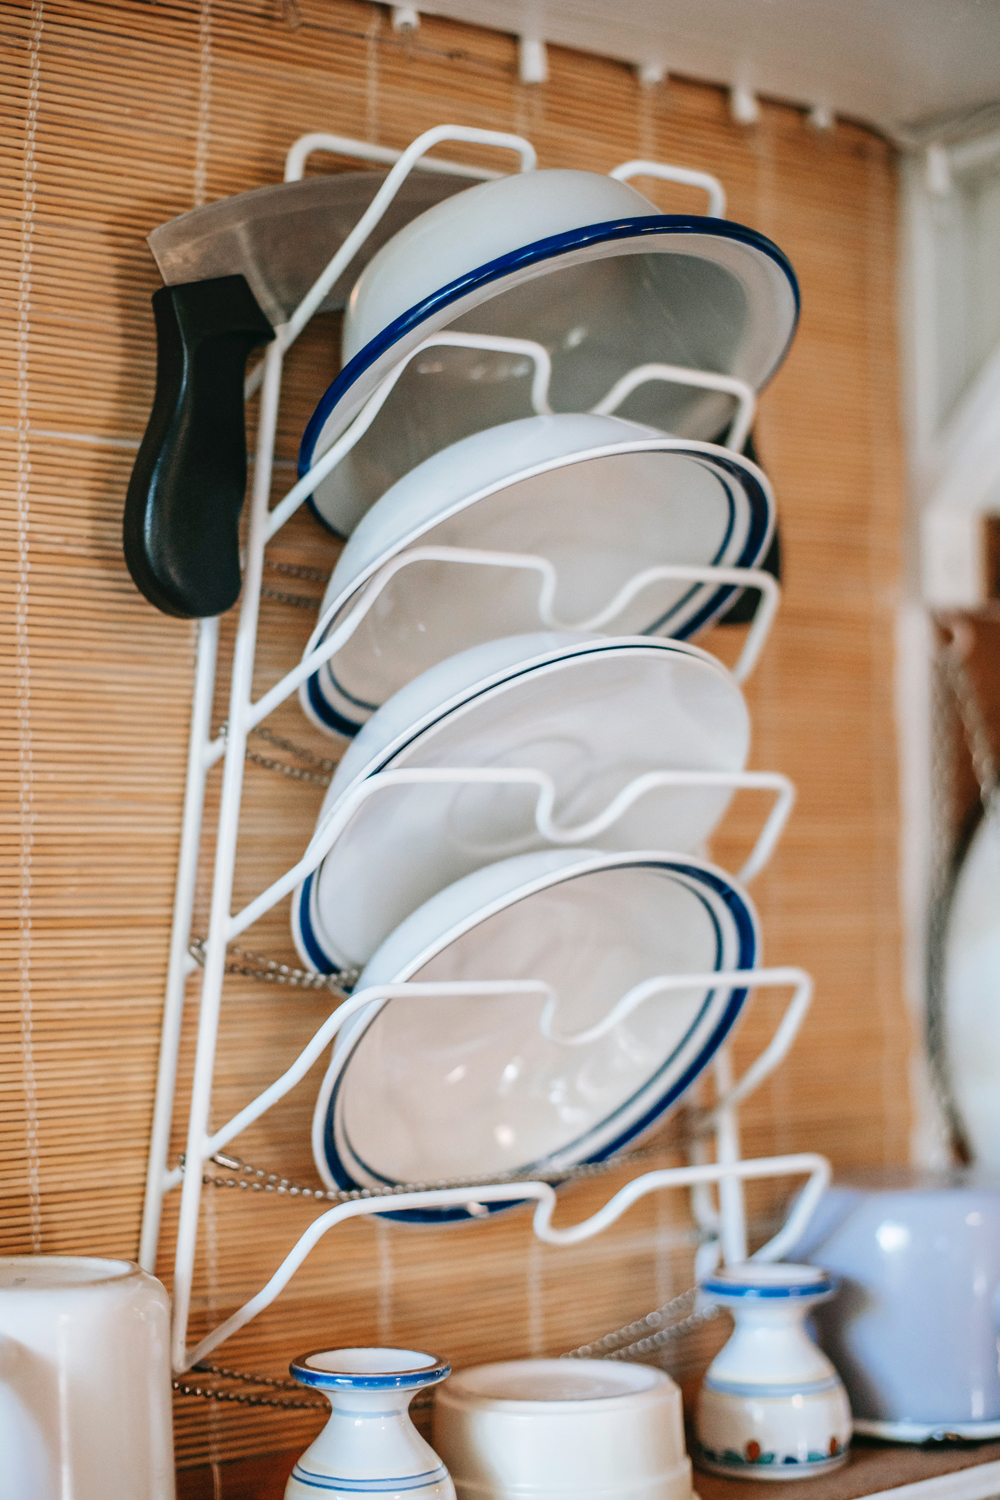 White and blue dinner plates and bowls stacked to dry in a vertical dish rack against a bamboo curtain